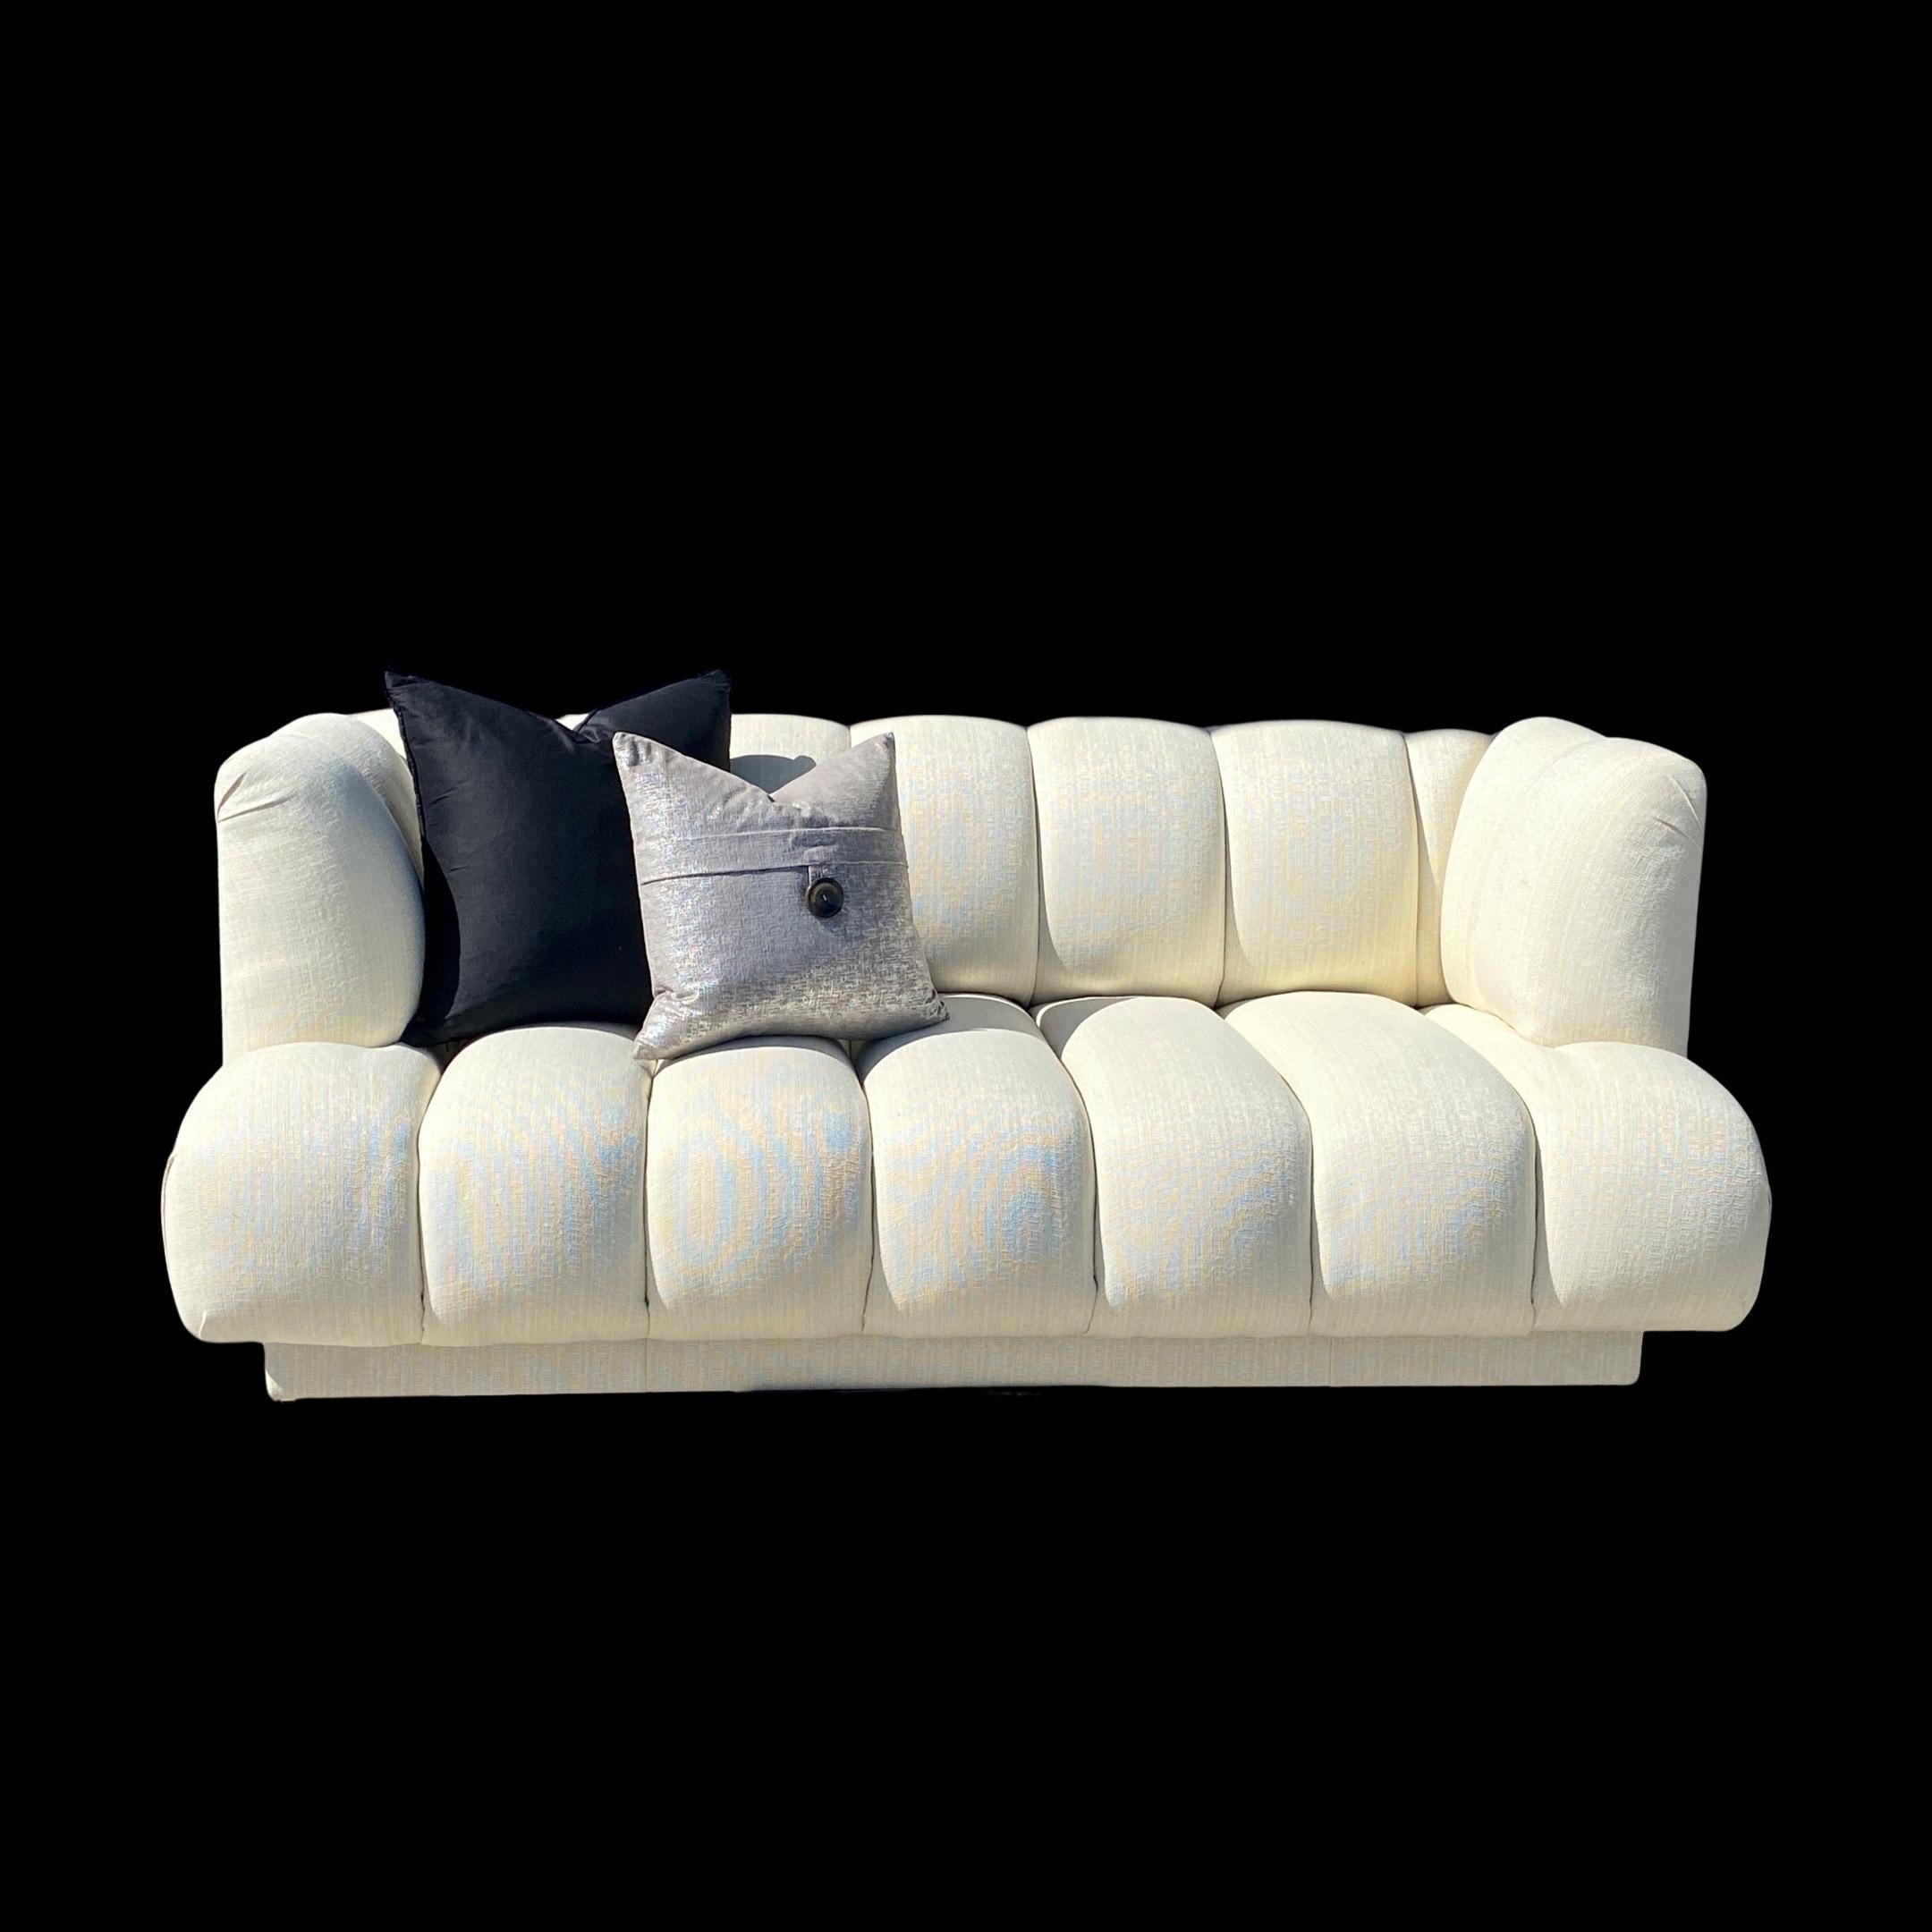 Late 20th Century Steve Chase Iconic Channel Sofa From Celebrity Estate in New Creme Upholstery  For Sale